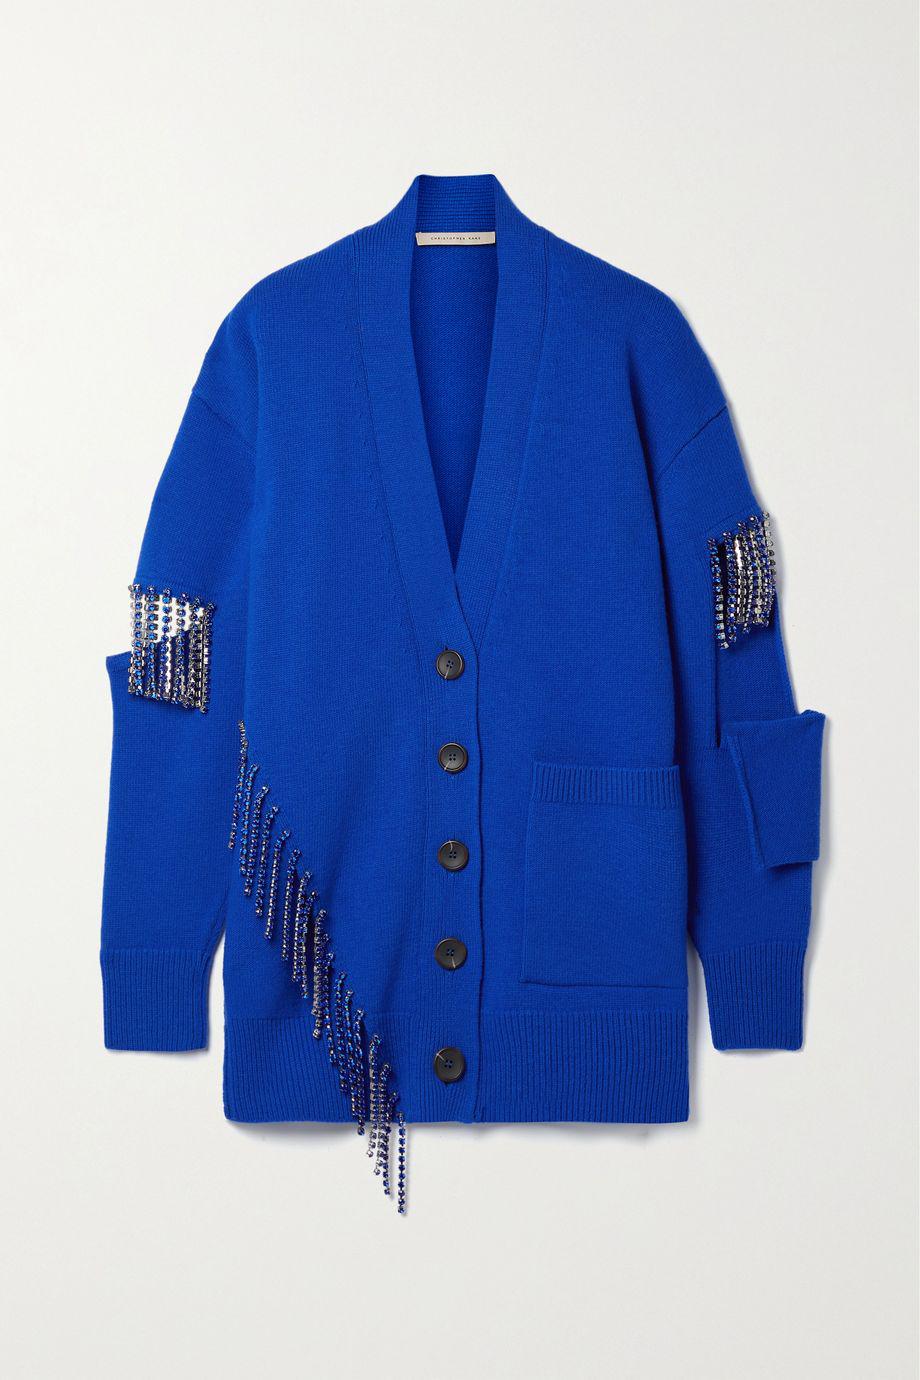 Crystal-embellished cutout wool cardigan by CHRISTOPHER KANE